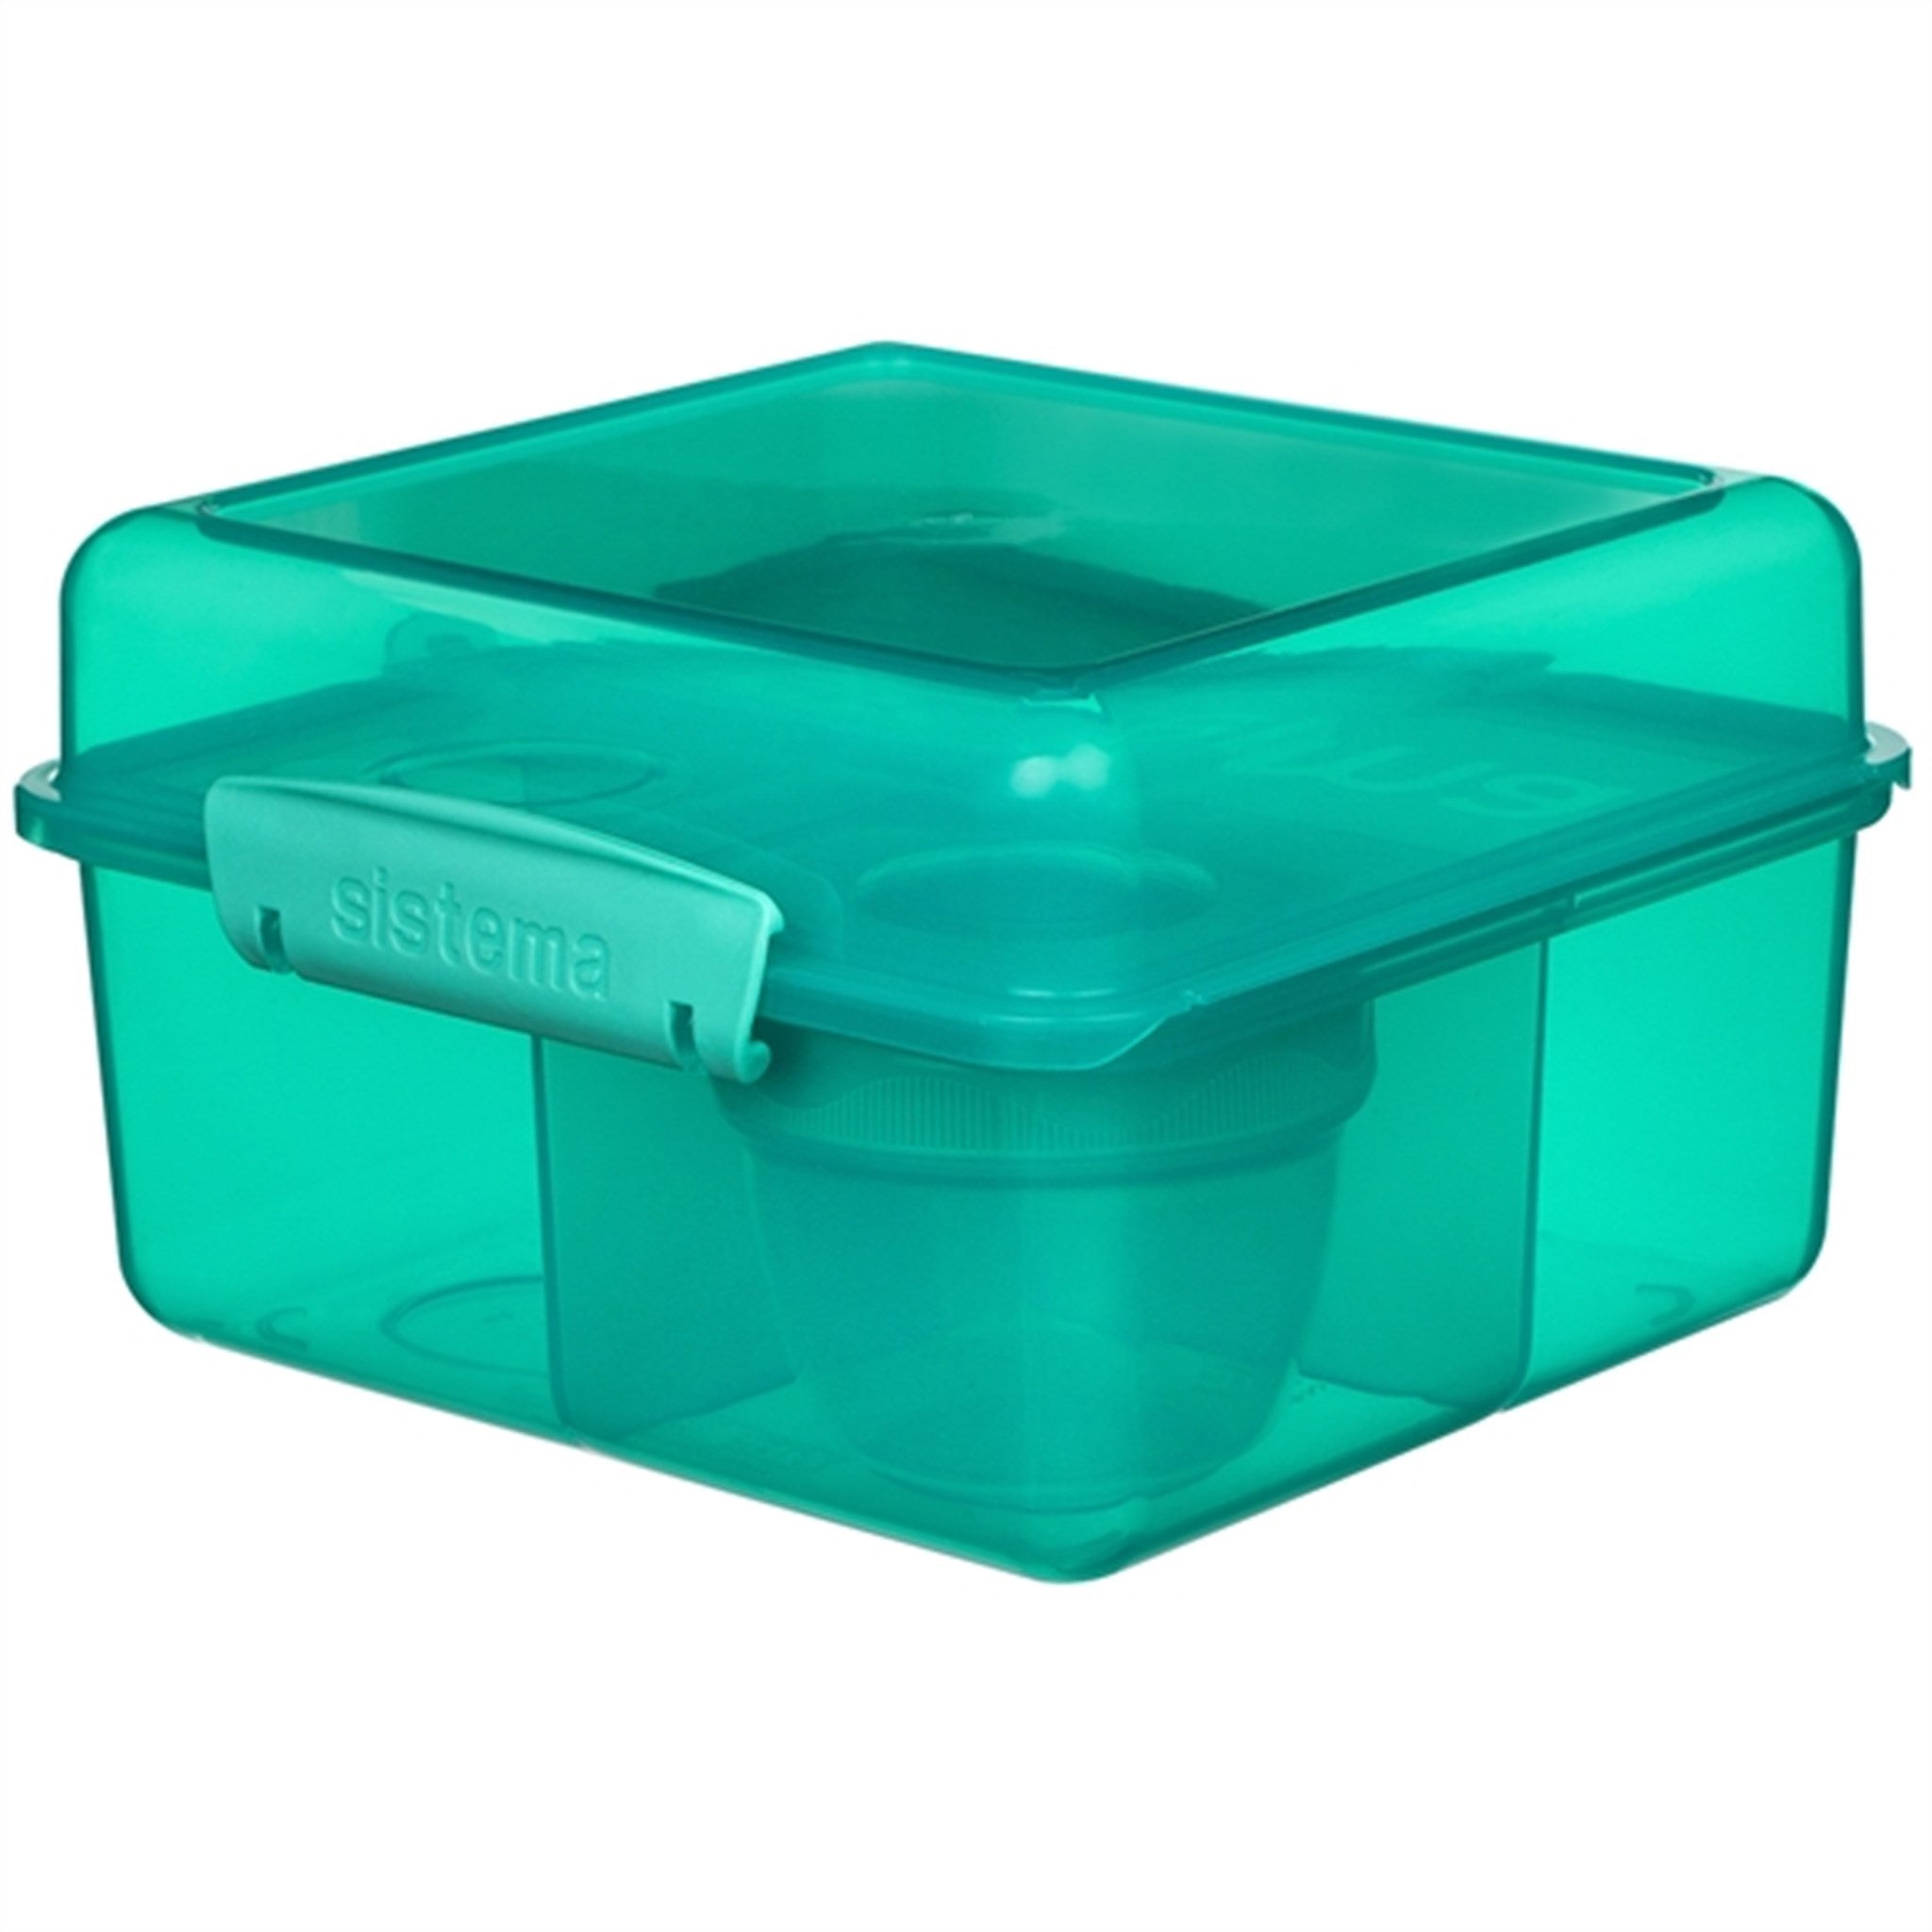 Sistema Lunch Cube Max Lunchlåda 2,0 L Teal